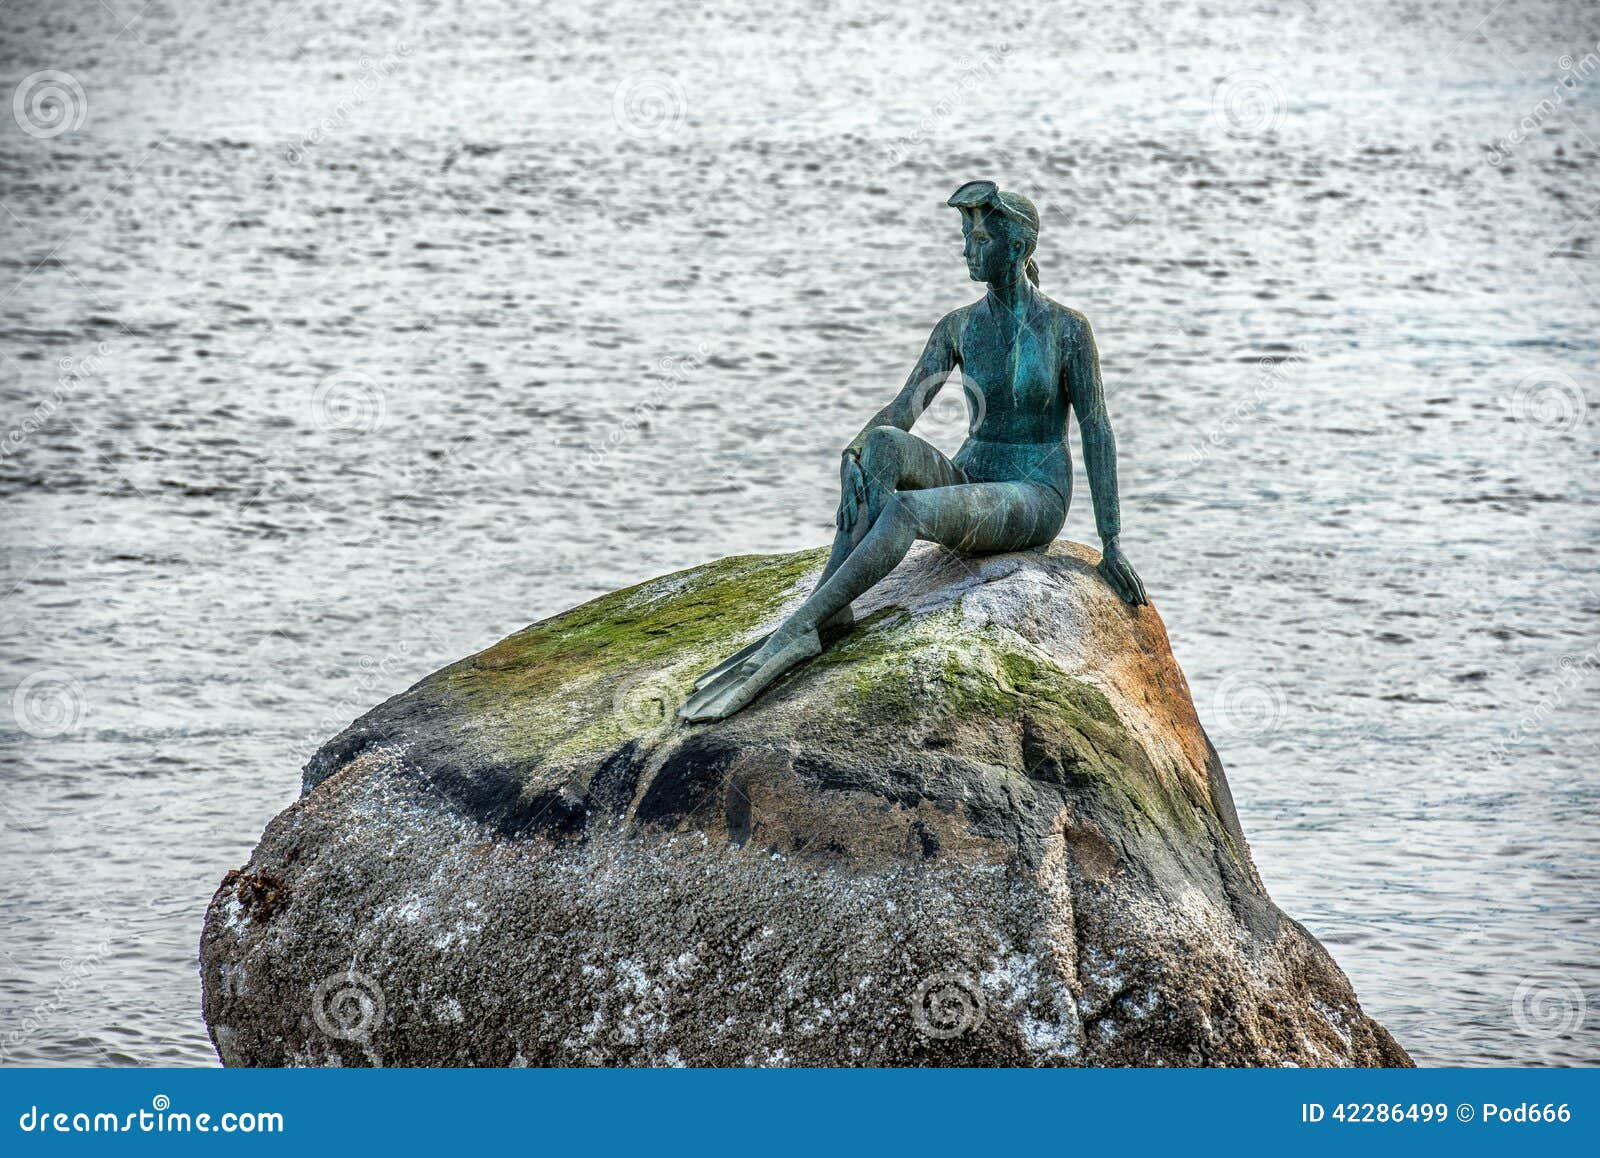 Statue of the Diver Stanley Park Vancouver Canada Stock Image - Image ...